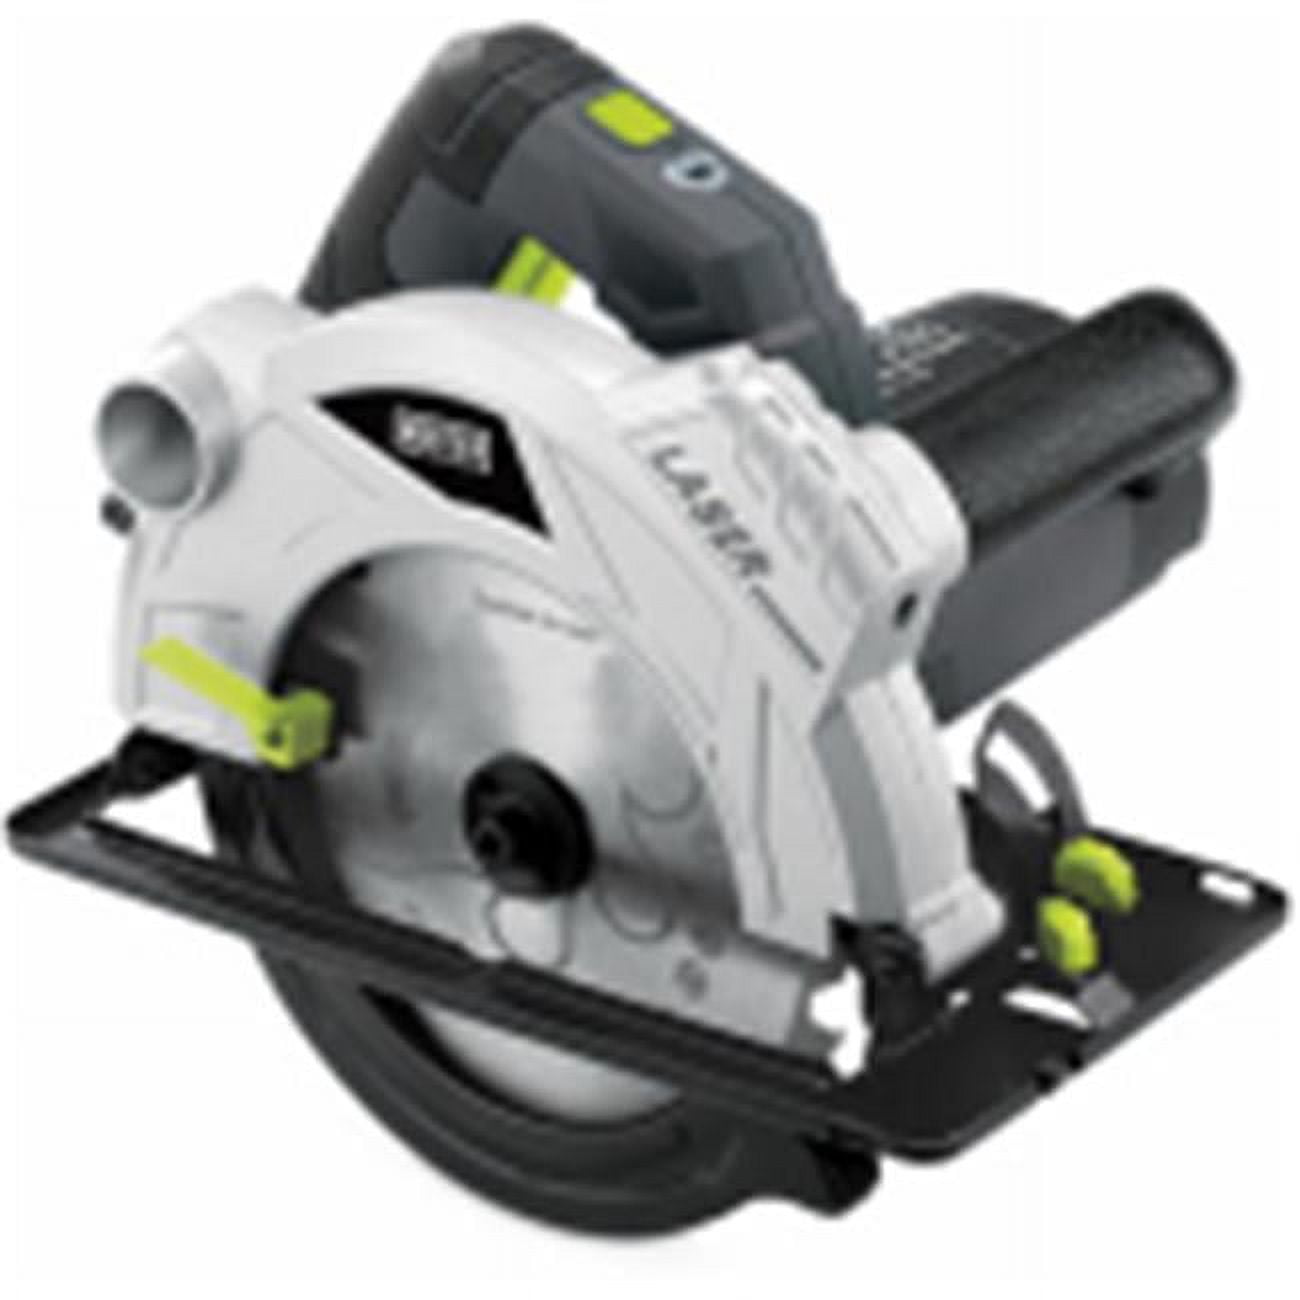 CPSC, Black and Decker Inc. Announce Recall to Repair 12-inch Miter Saws